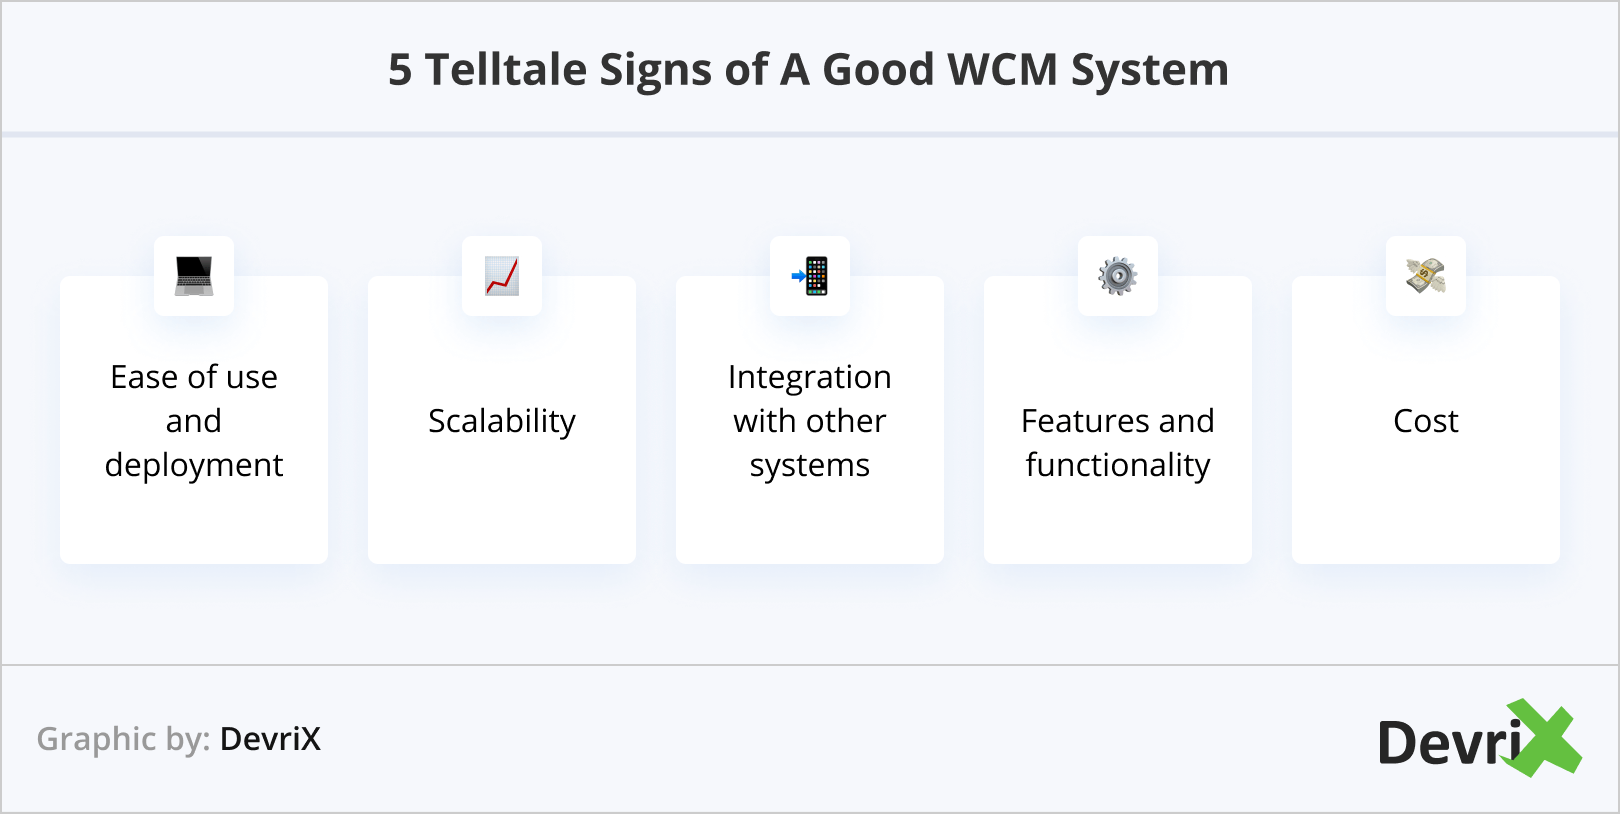 5 Telltale Signs of A Good WCM System